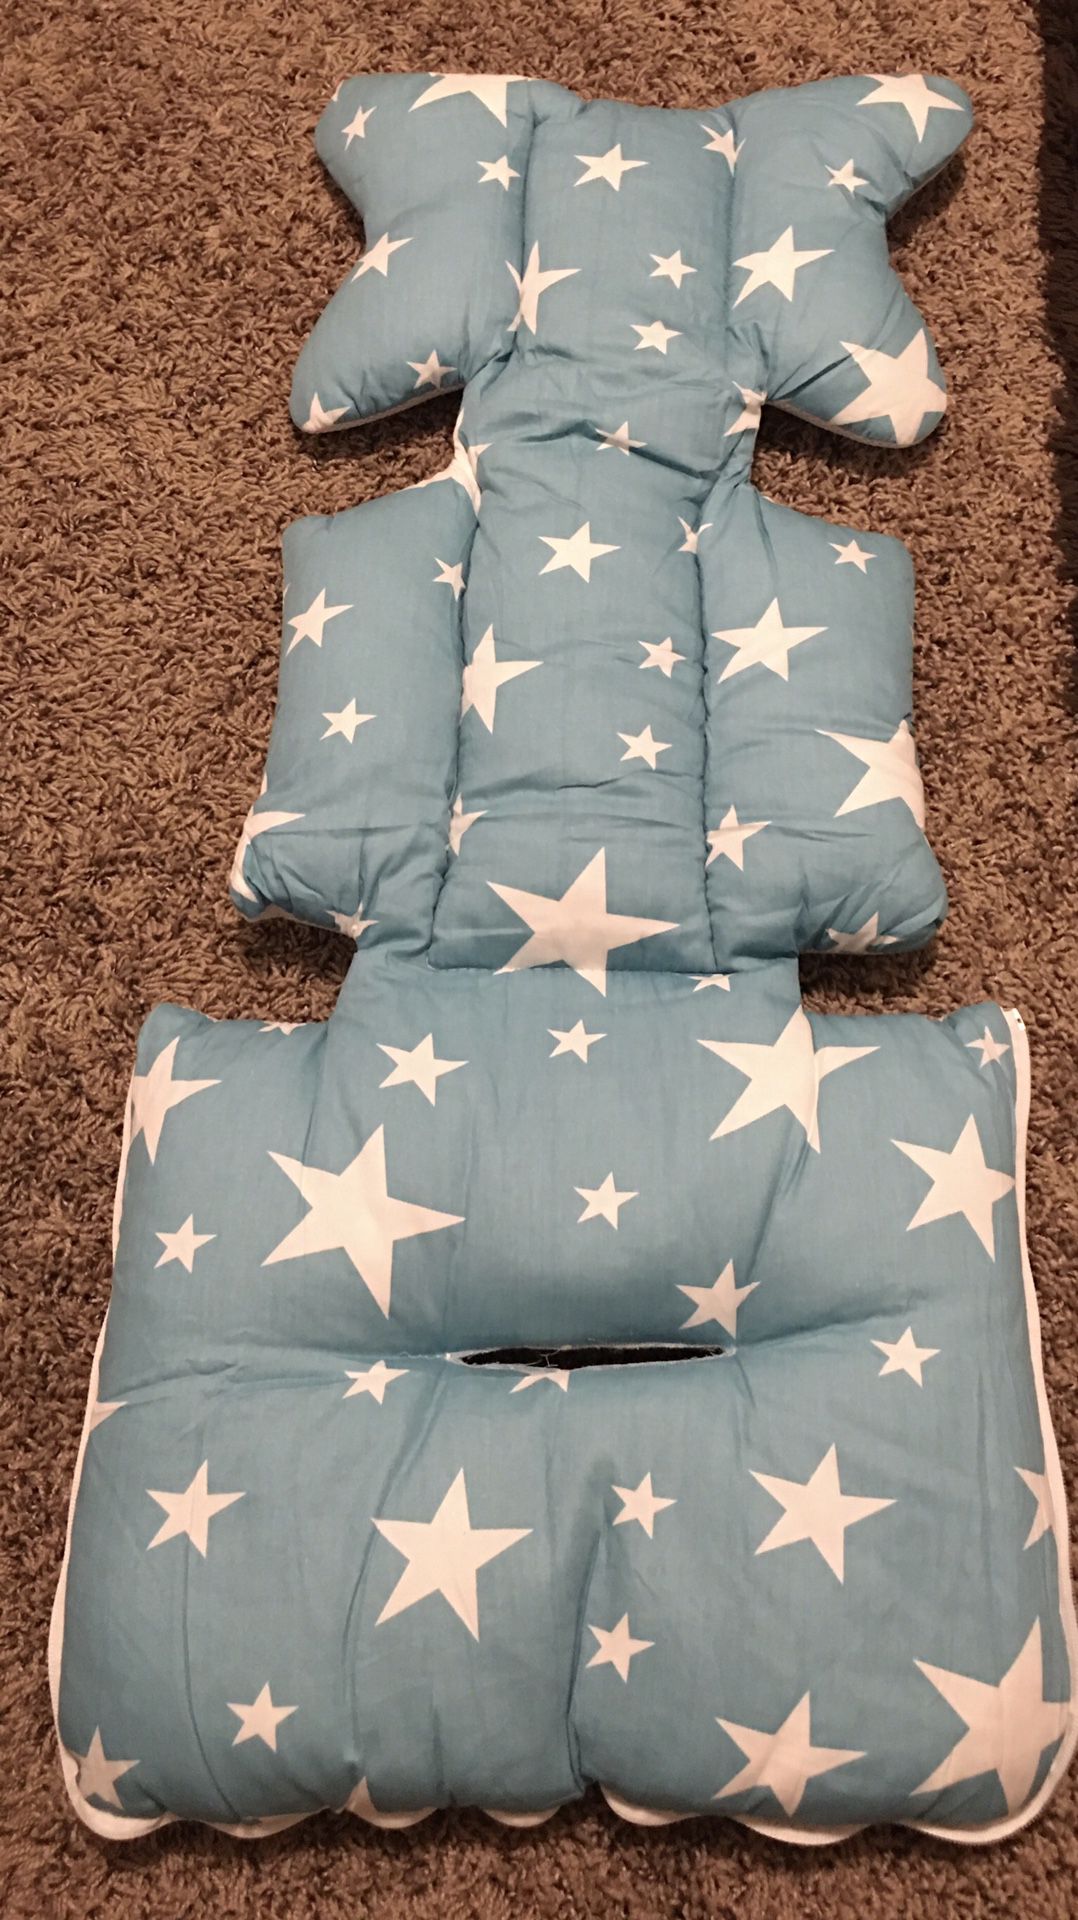 Msliy Universal Baby Stroller Cushion Infant Car Seat Liner Pure Cotton Thick Pad 13.7x30.7 Inches (Baby Blue Stars or Pink Stars)